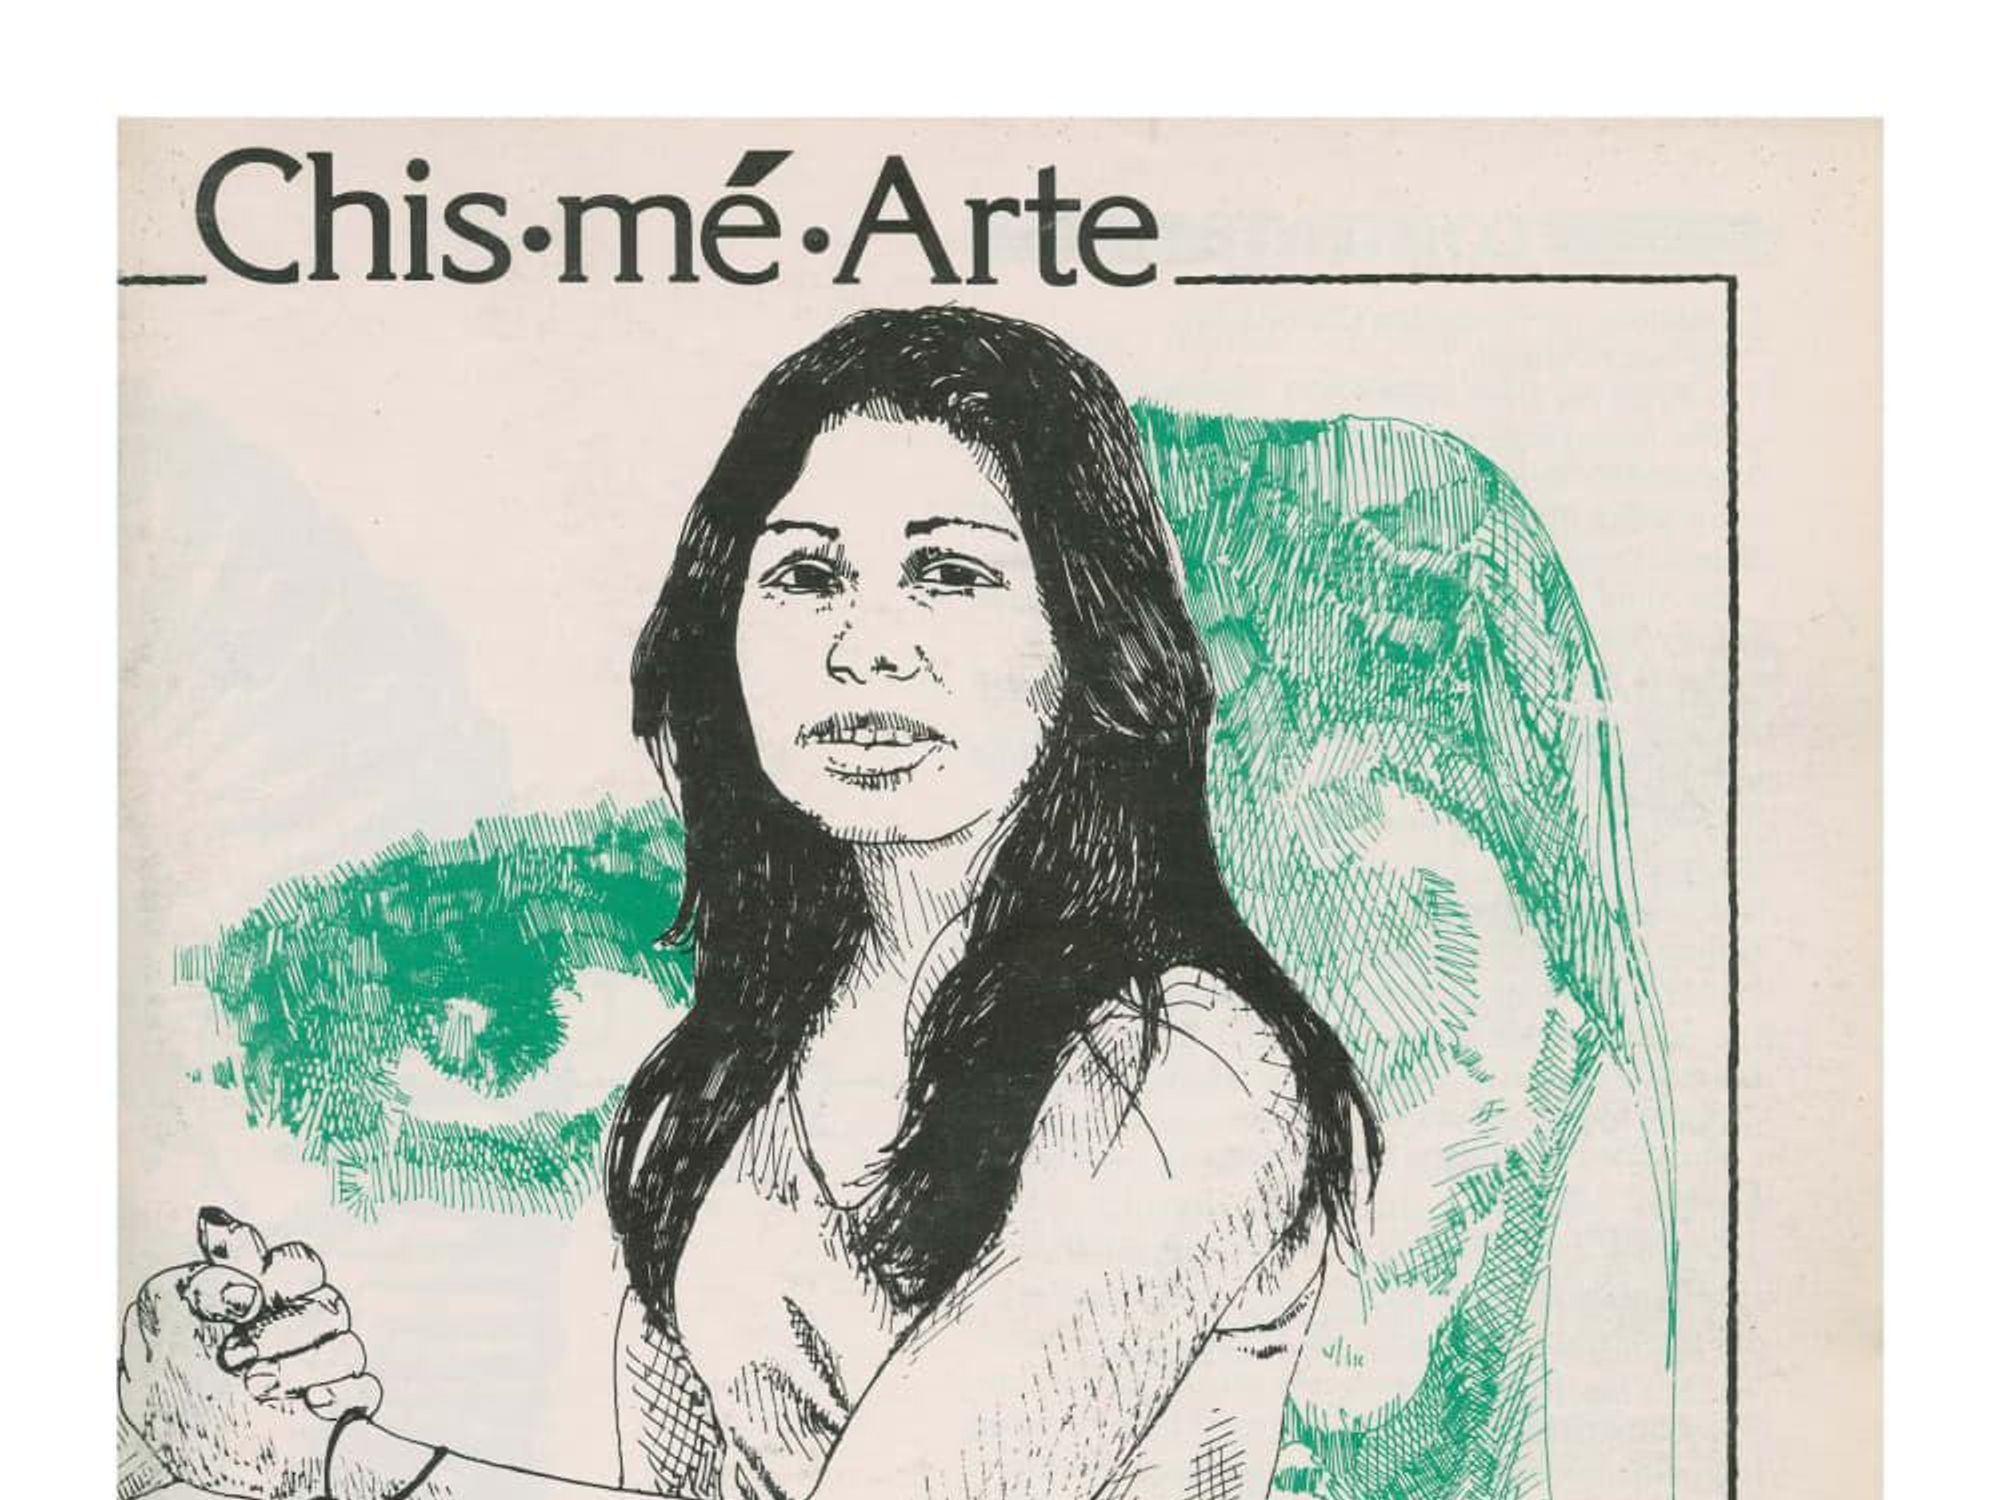 MFAH Sybil Venegas, “Conditions for Producing Chicana Art,” Chismearte, 1977